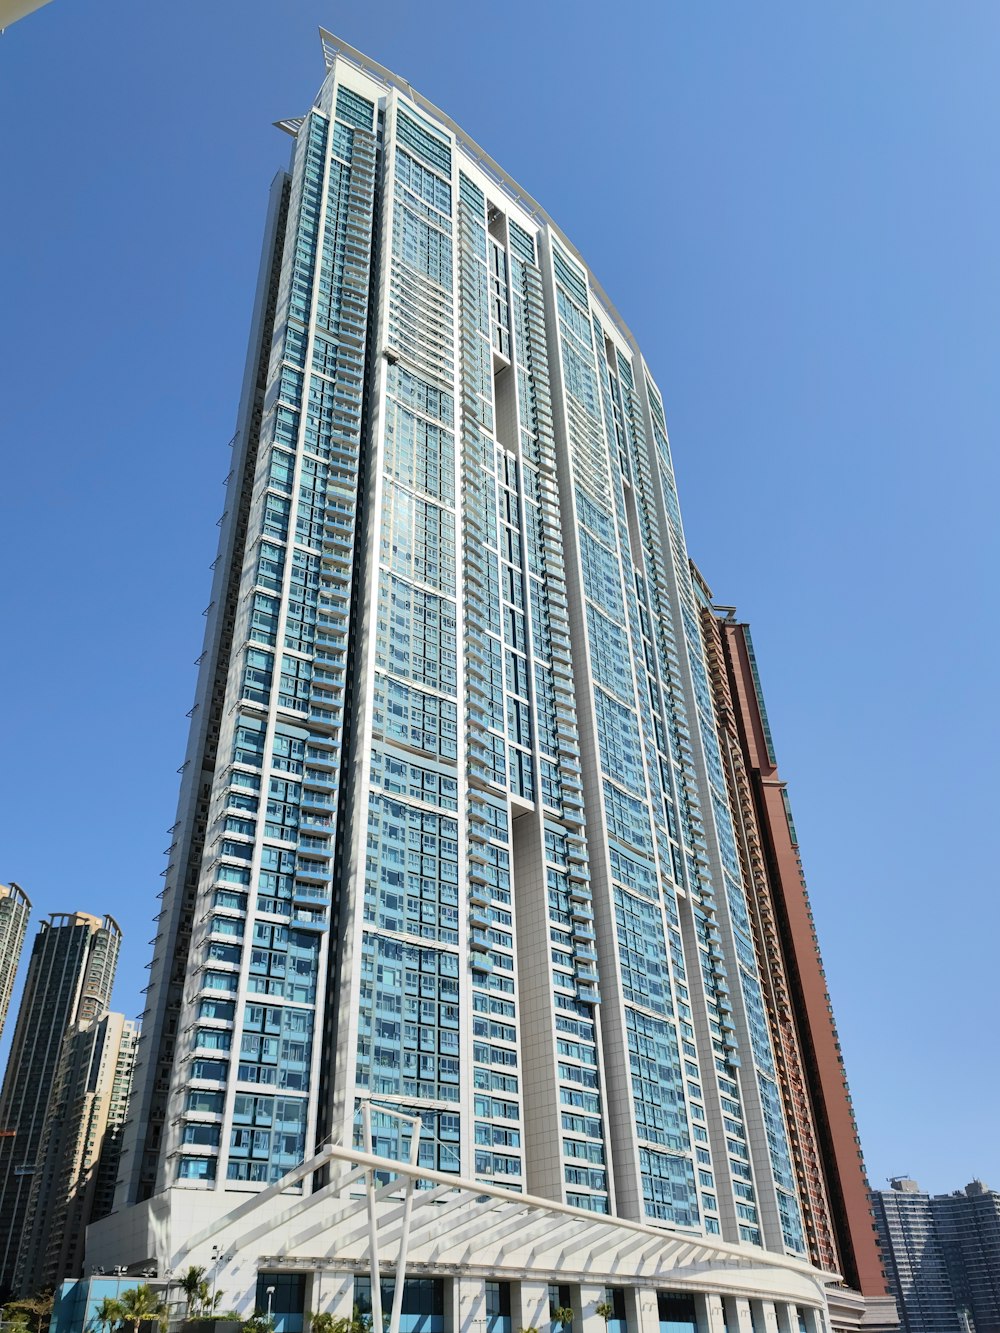 a tall building with many windows on the side of it